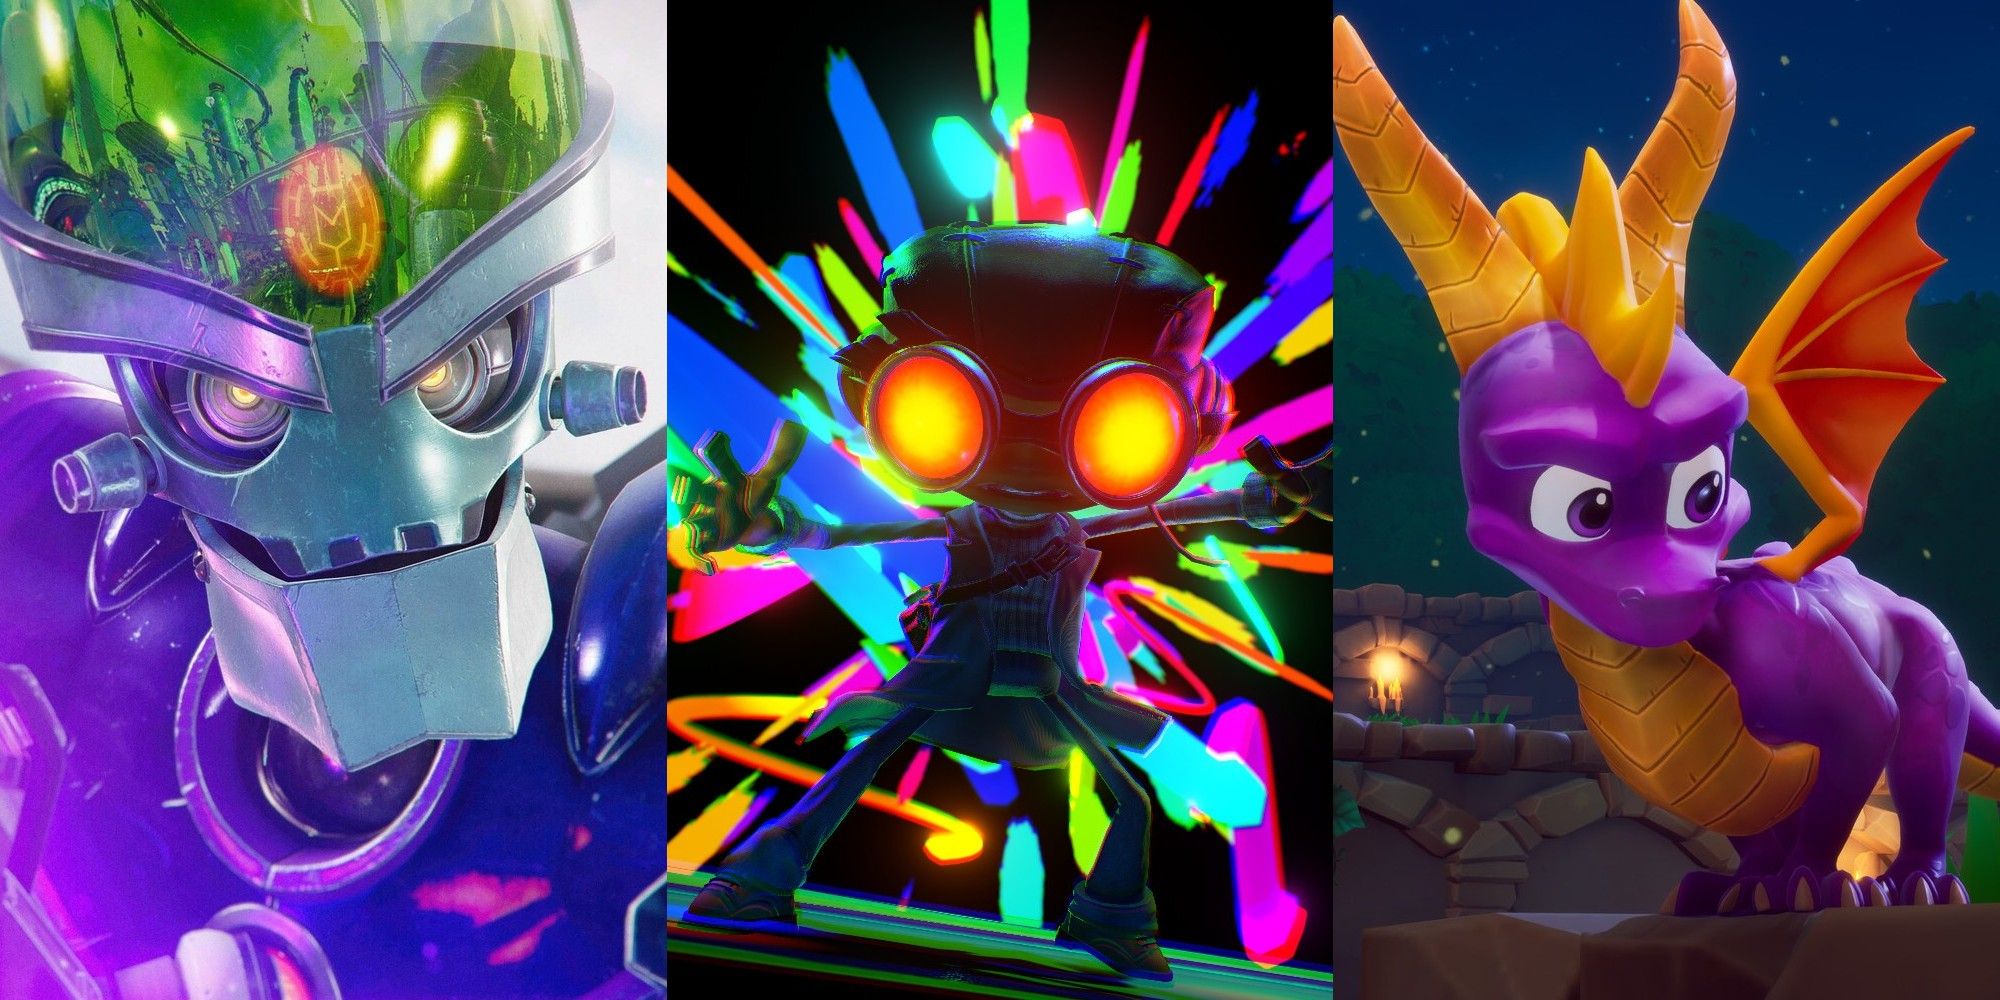 PS4 and PS5 3D Platformer Spyro, Psychonauts 2, and Ratchet and Clank